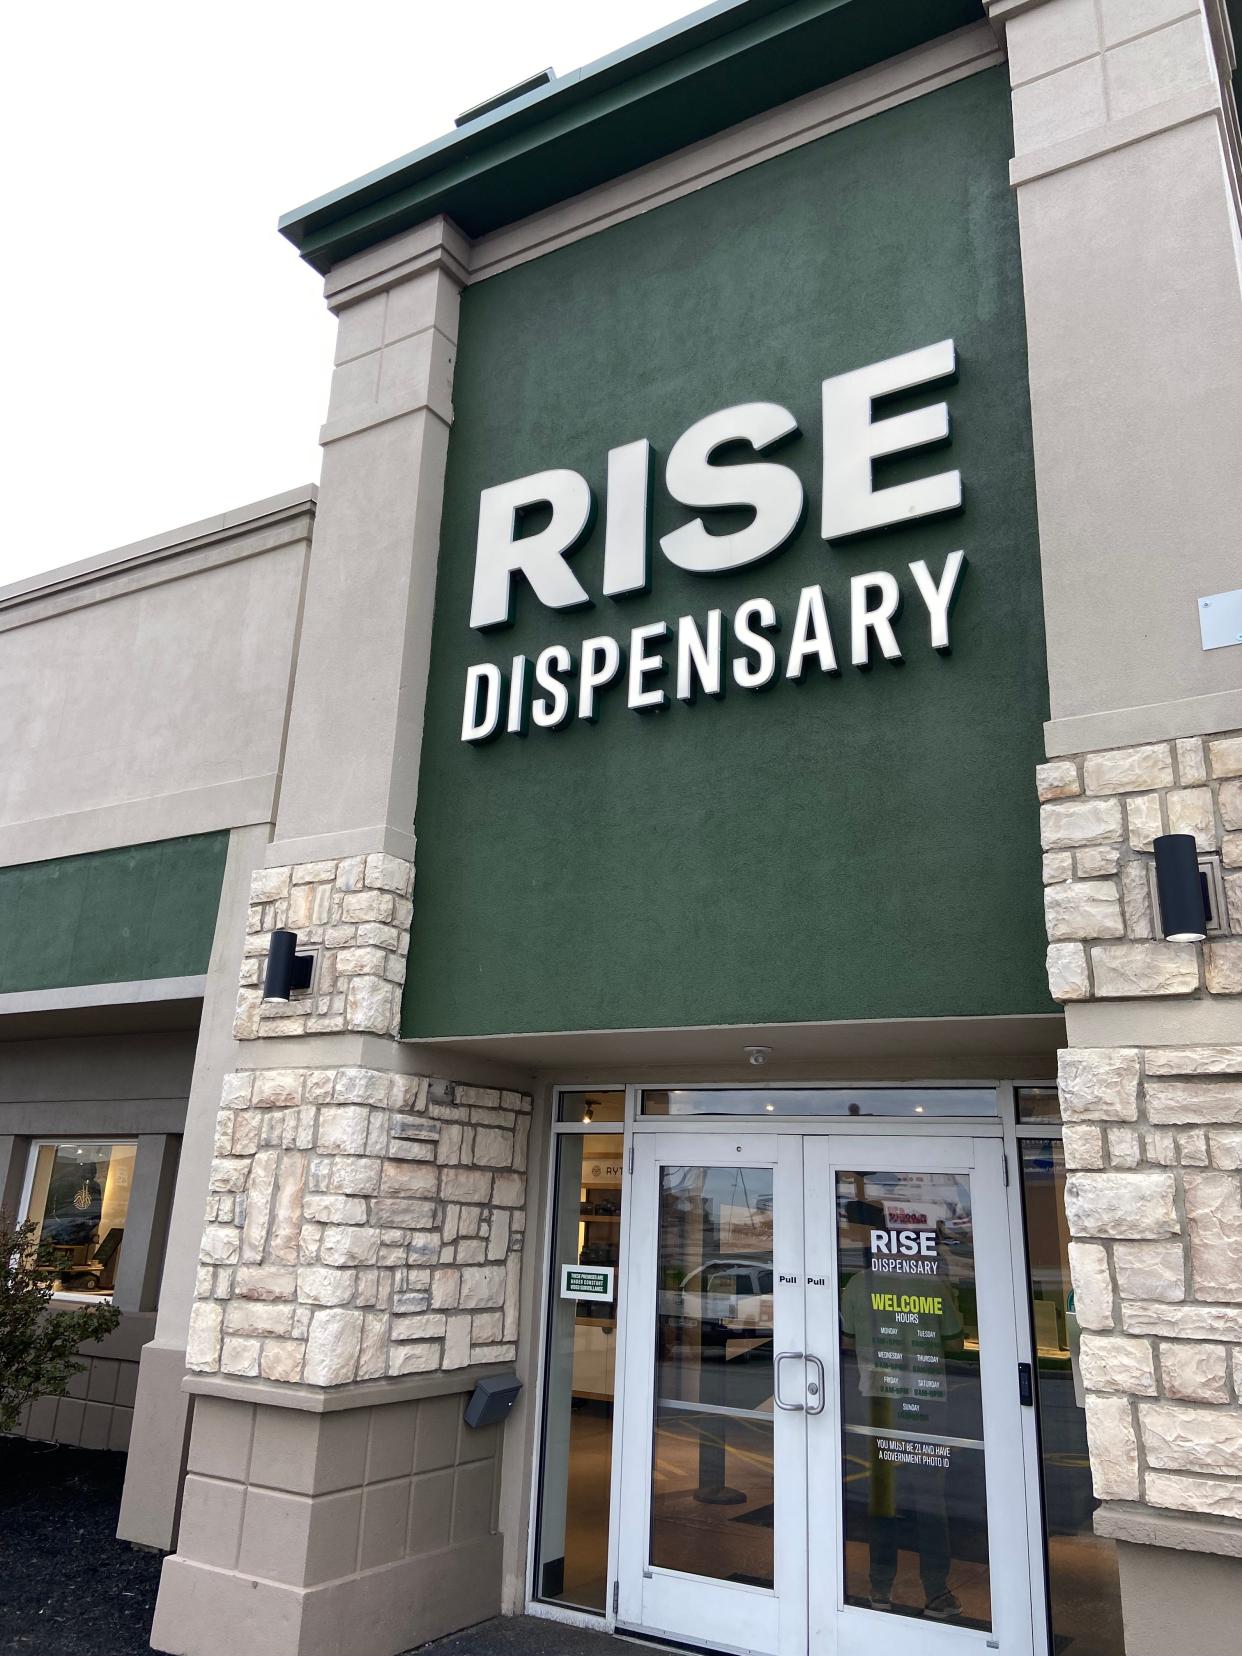 RISE cannabis dispensary in Henrietta will be having a discount on all products Saturday, with music and food in the parking lot.